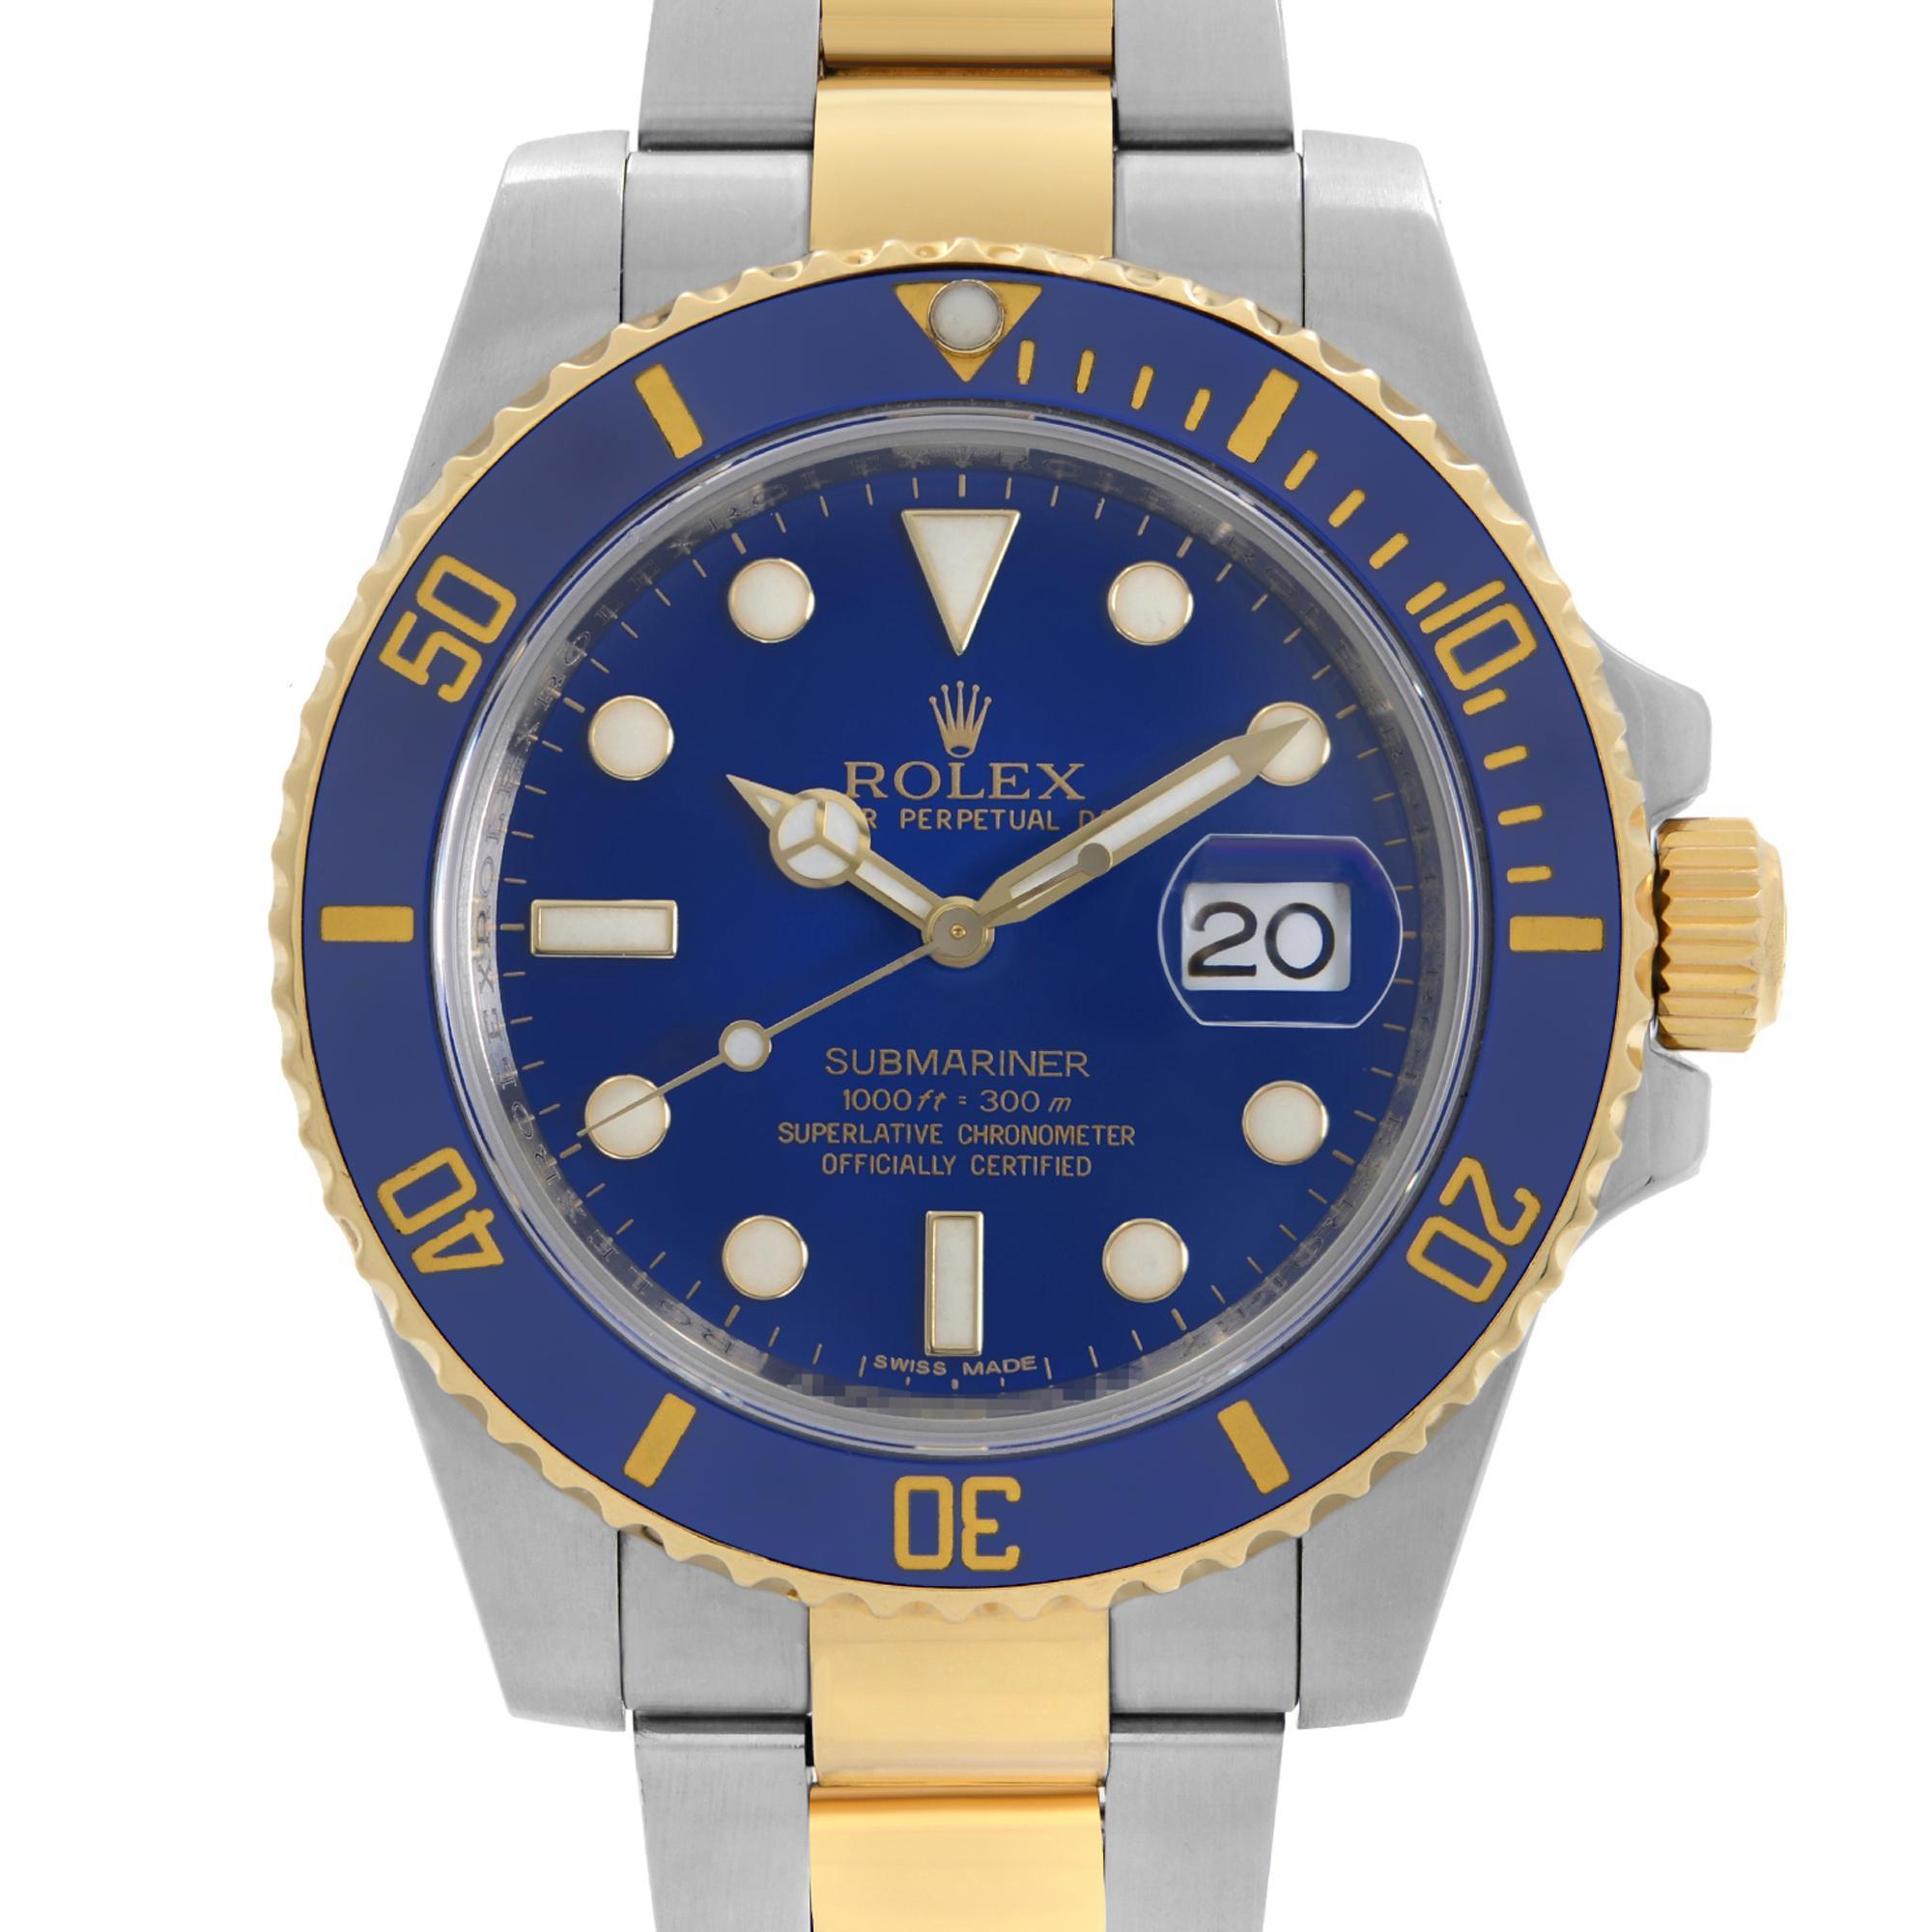 Pre-owned Rolex Submariner 40mm 18K Gold Steel Ceramic Blue Dial Automatic Watch 116613LB. No Original Box and Papers are Included. Comes with Chronostore Presentation Box and Chronostore Authenticity Card. Covered by 1-year Chronostore Warranty.